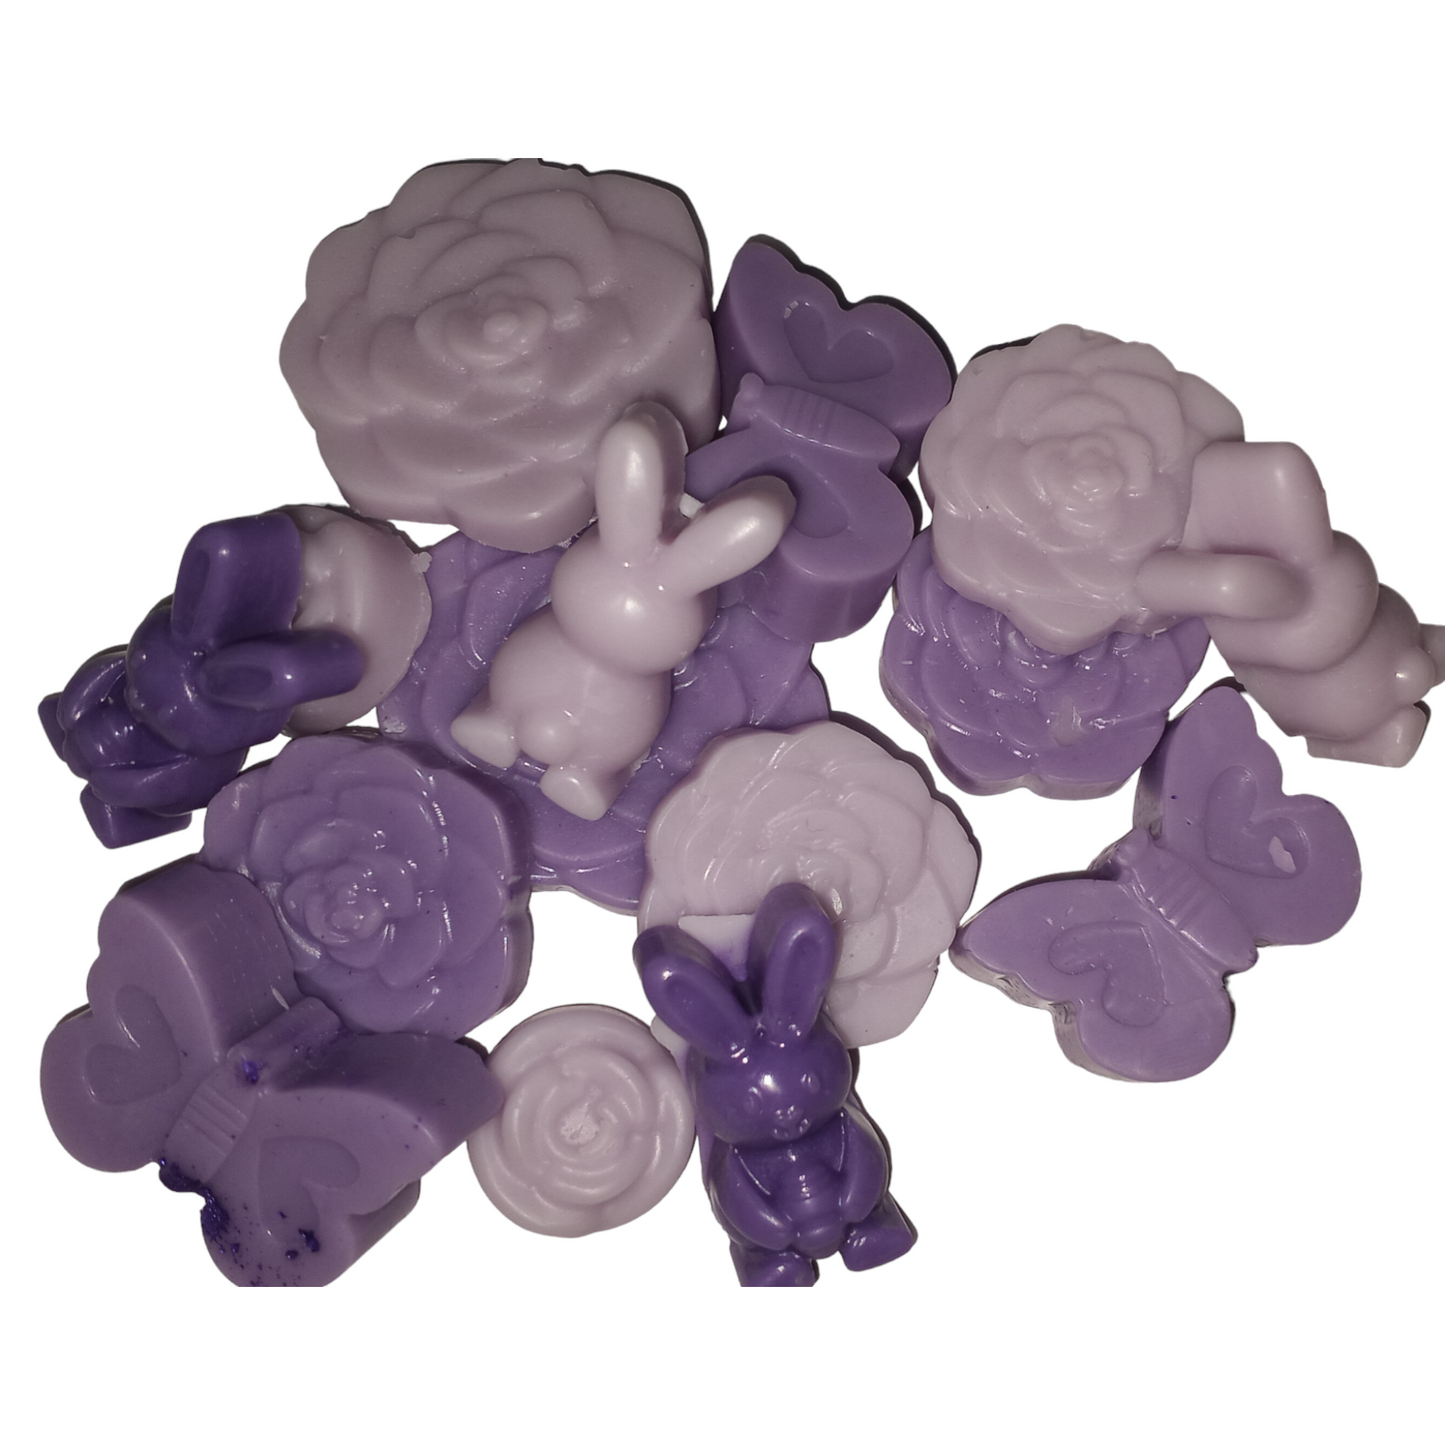 Bunnies, Chicks  & Blooms Soy Wax Melts